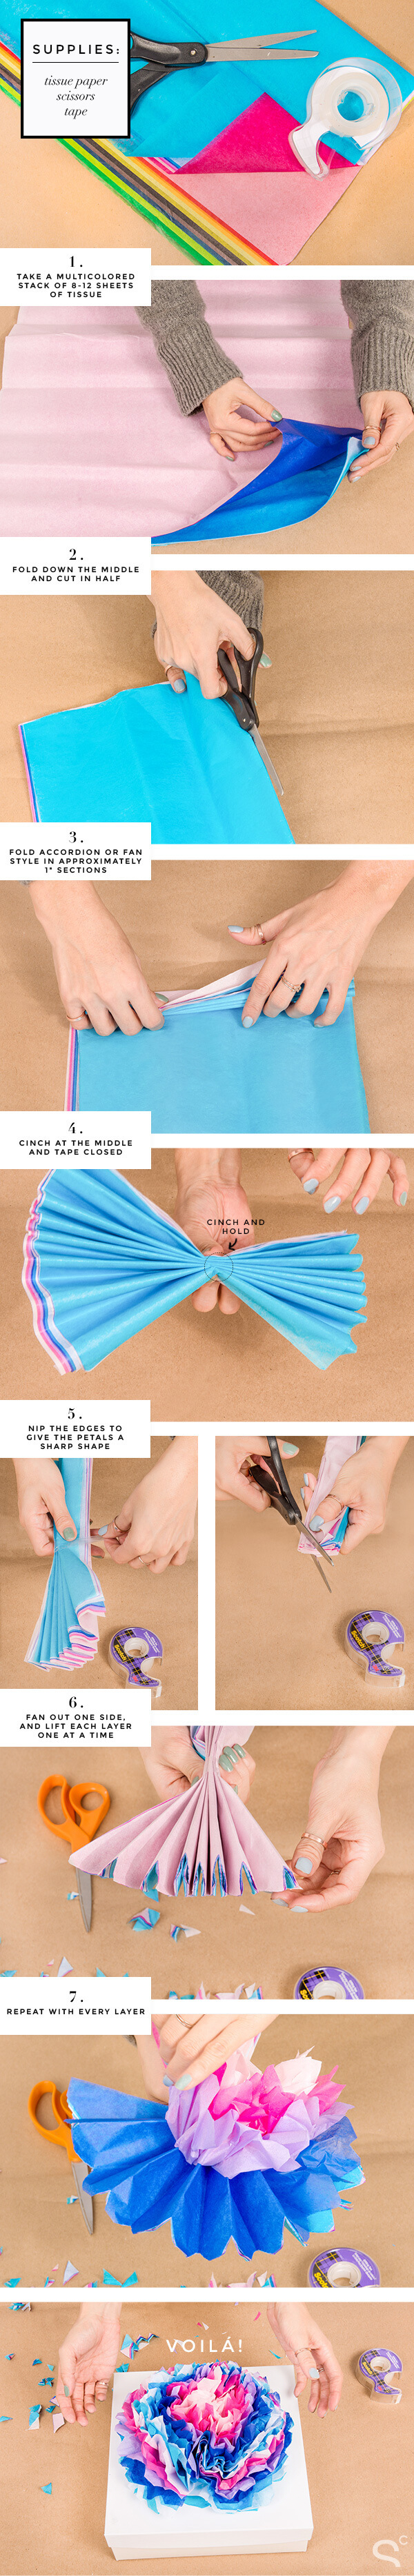 diy-gift-wrapping-packaging-ideas-paper-flower Unique & Adorable Gift Wrapping Ideas